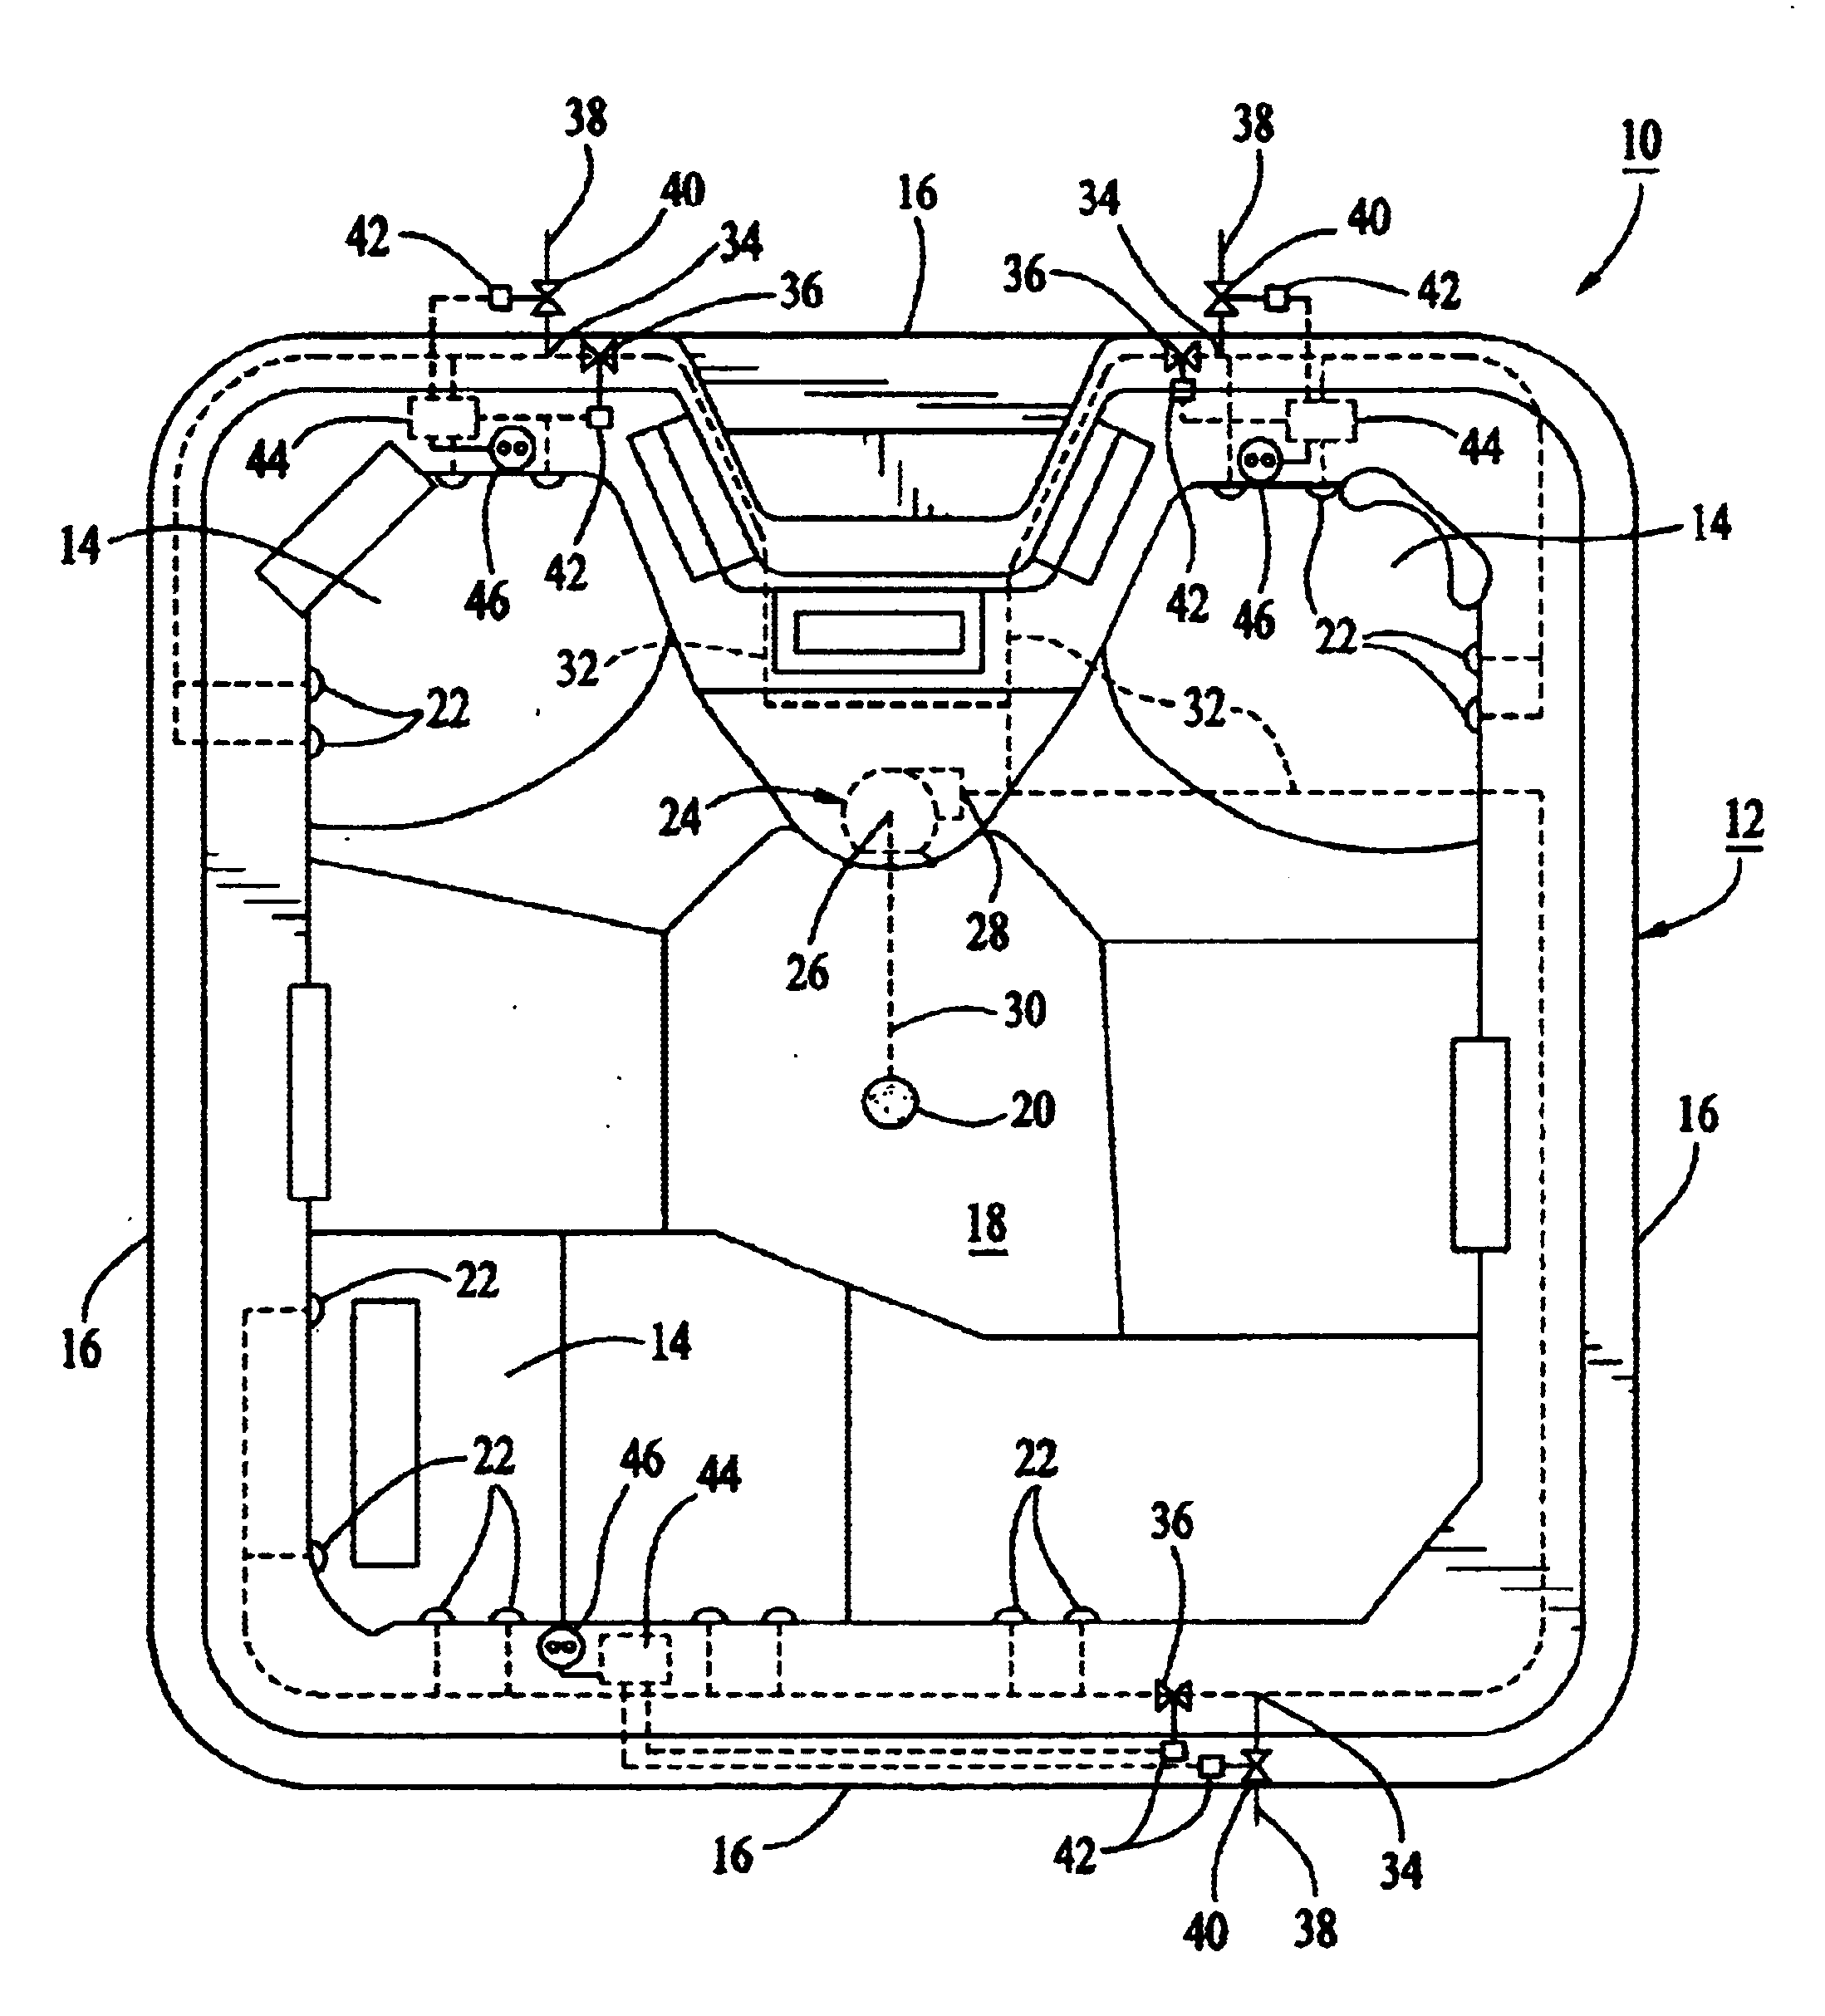 Water recreational apparatus with remote controllable valves